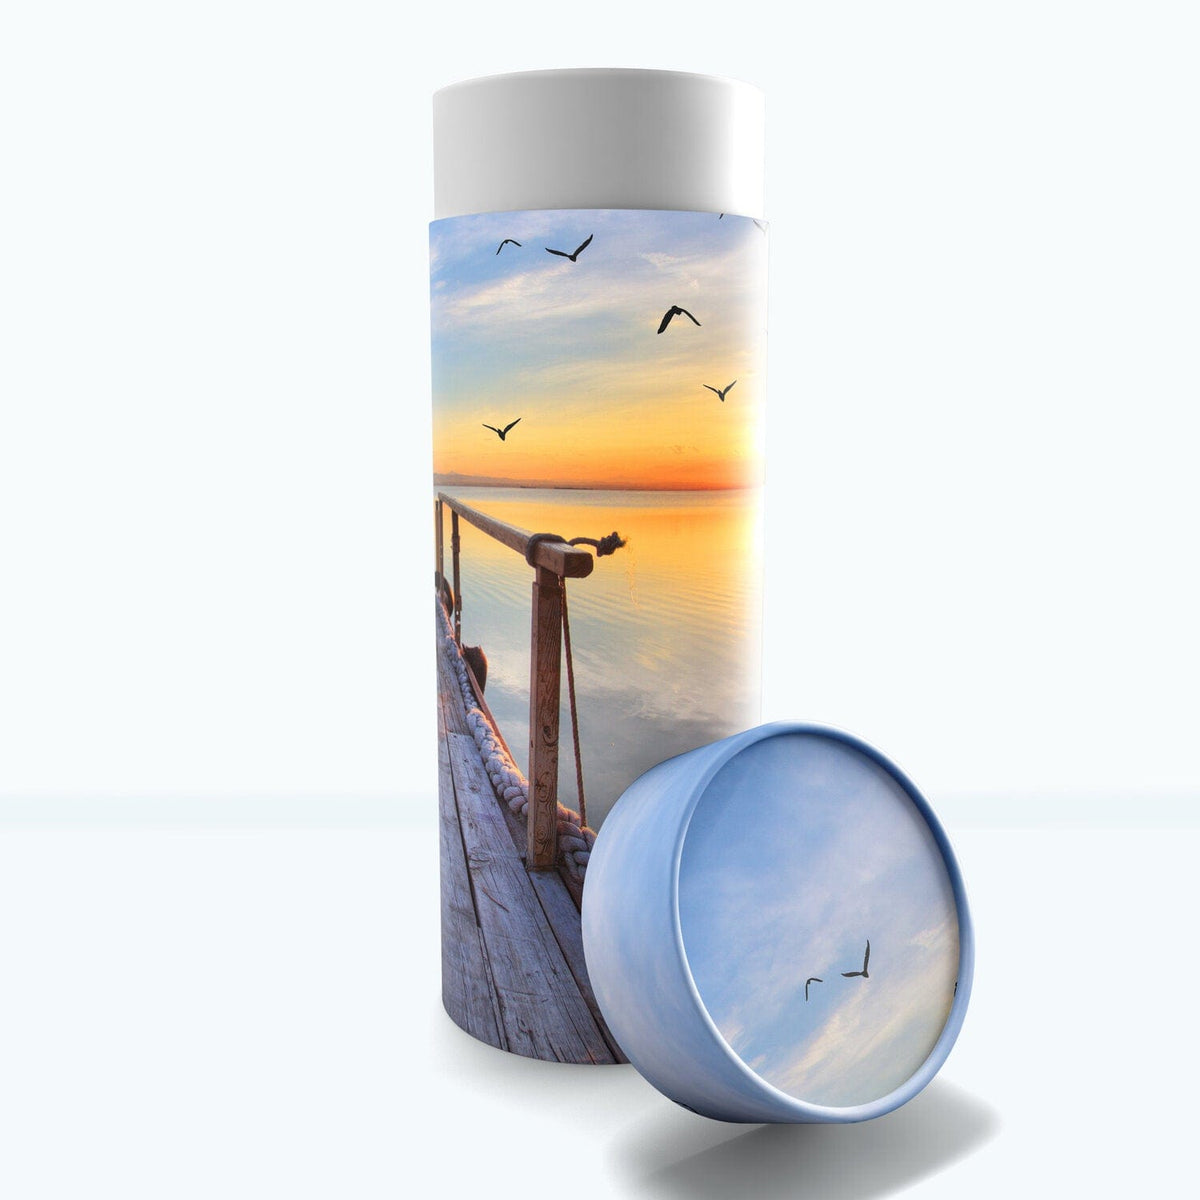 Commemorative Cremation Urns Medium Dock of the Bay Sunset Biodegradable &amp; Eco Friendly Burial or Scattering Urn / Tube